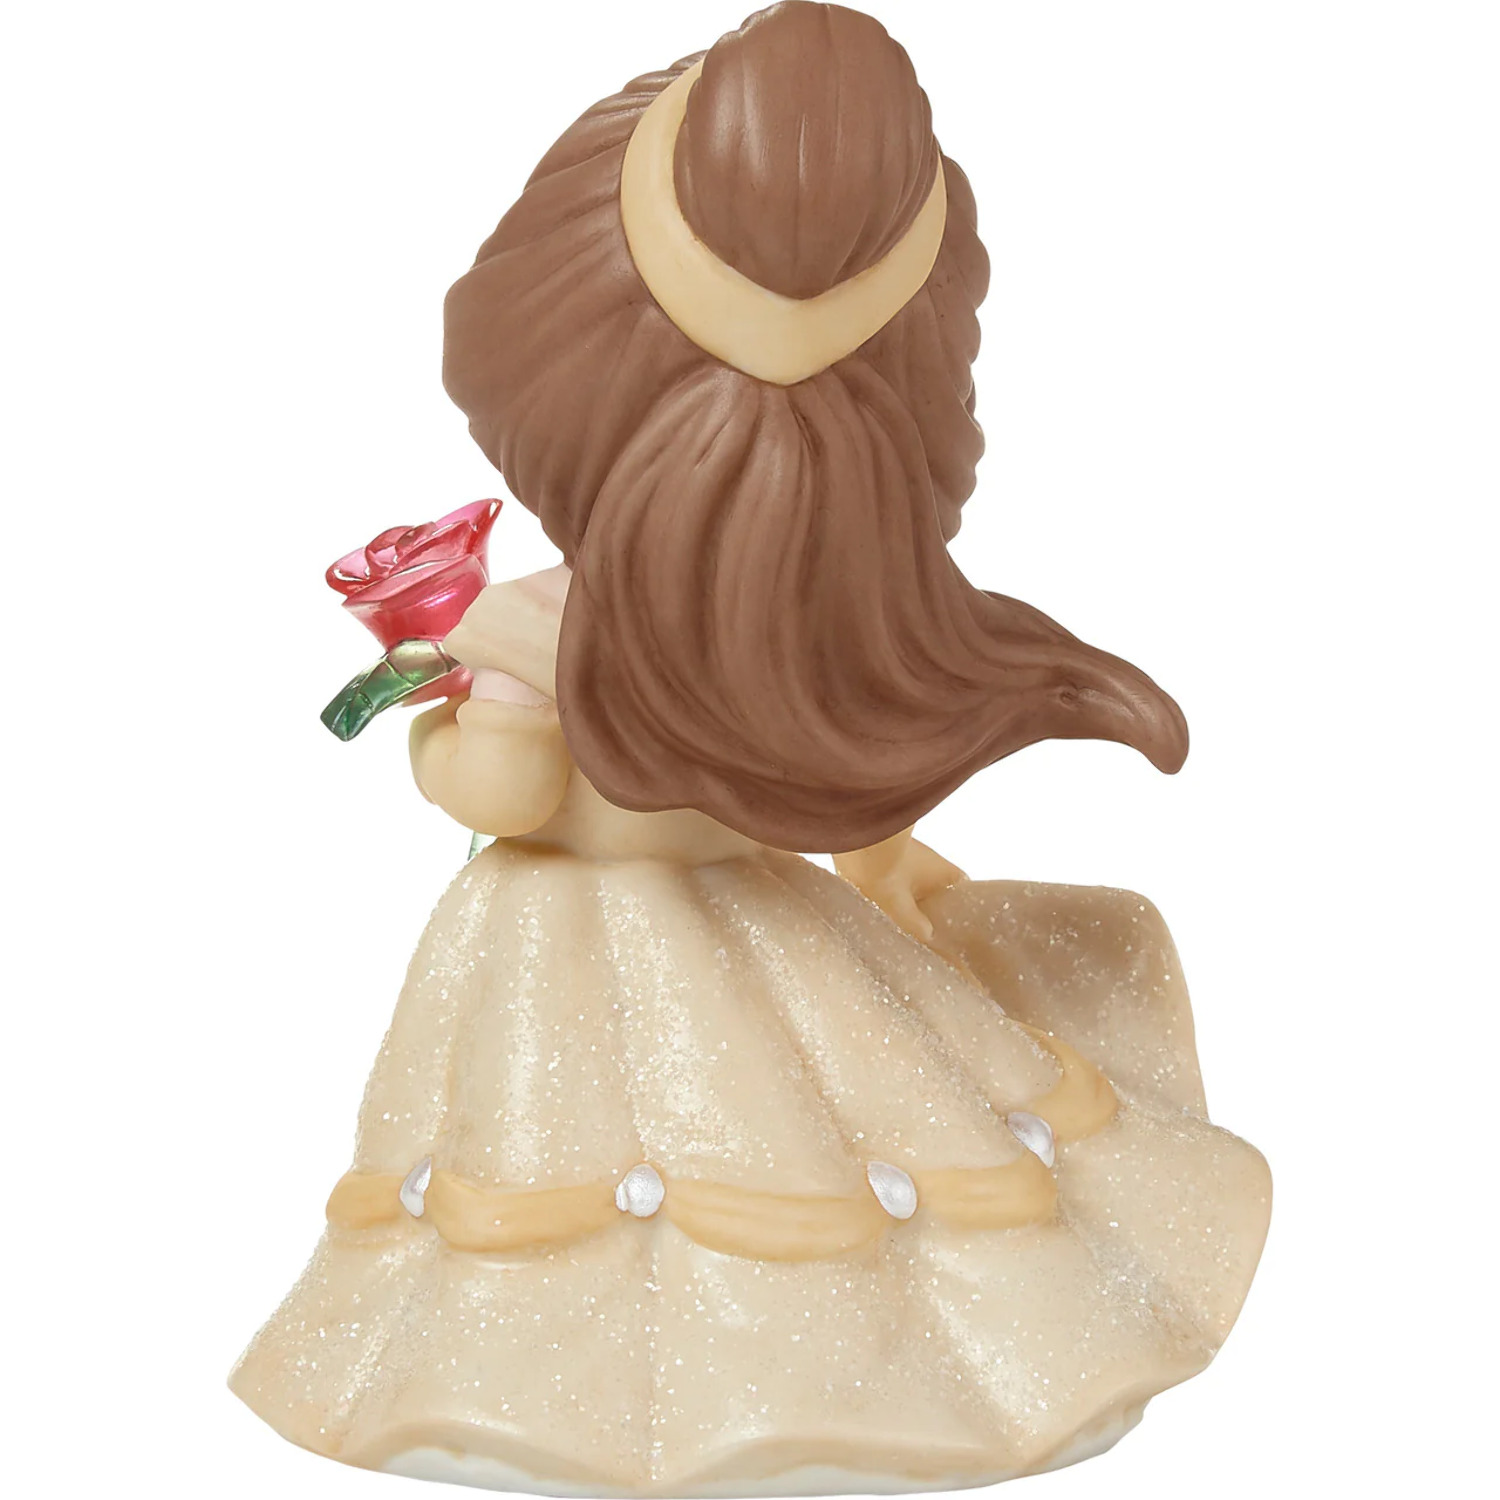 Precious Moments Disney Belle An Enchanting Moment Awaits Figurine #222028 - image 2 of 4